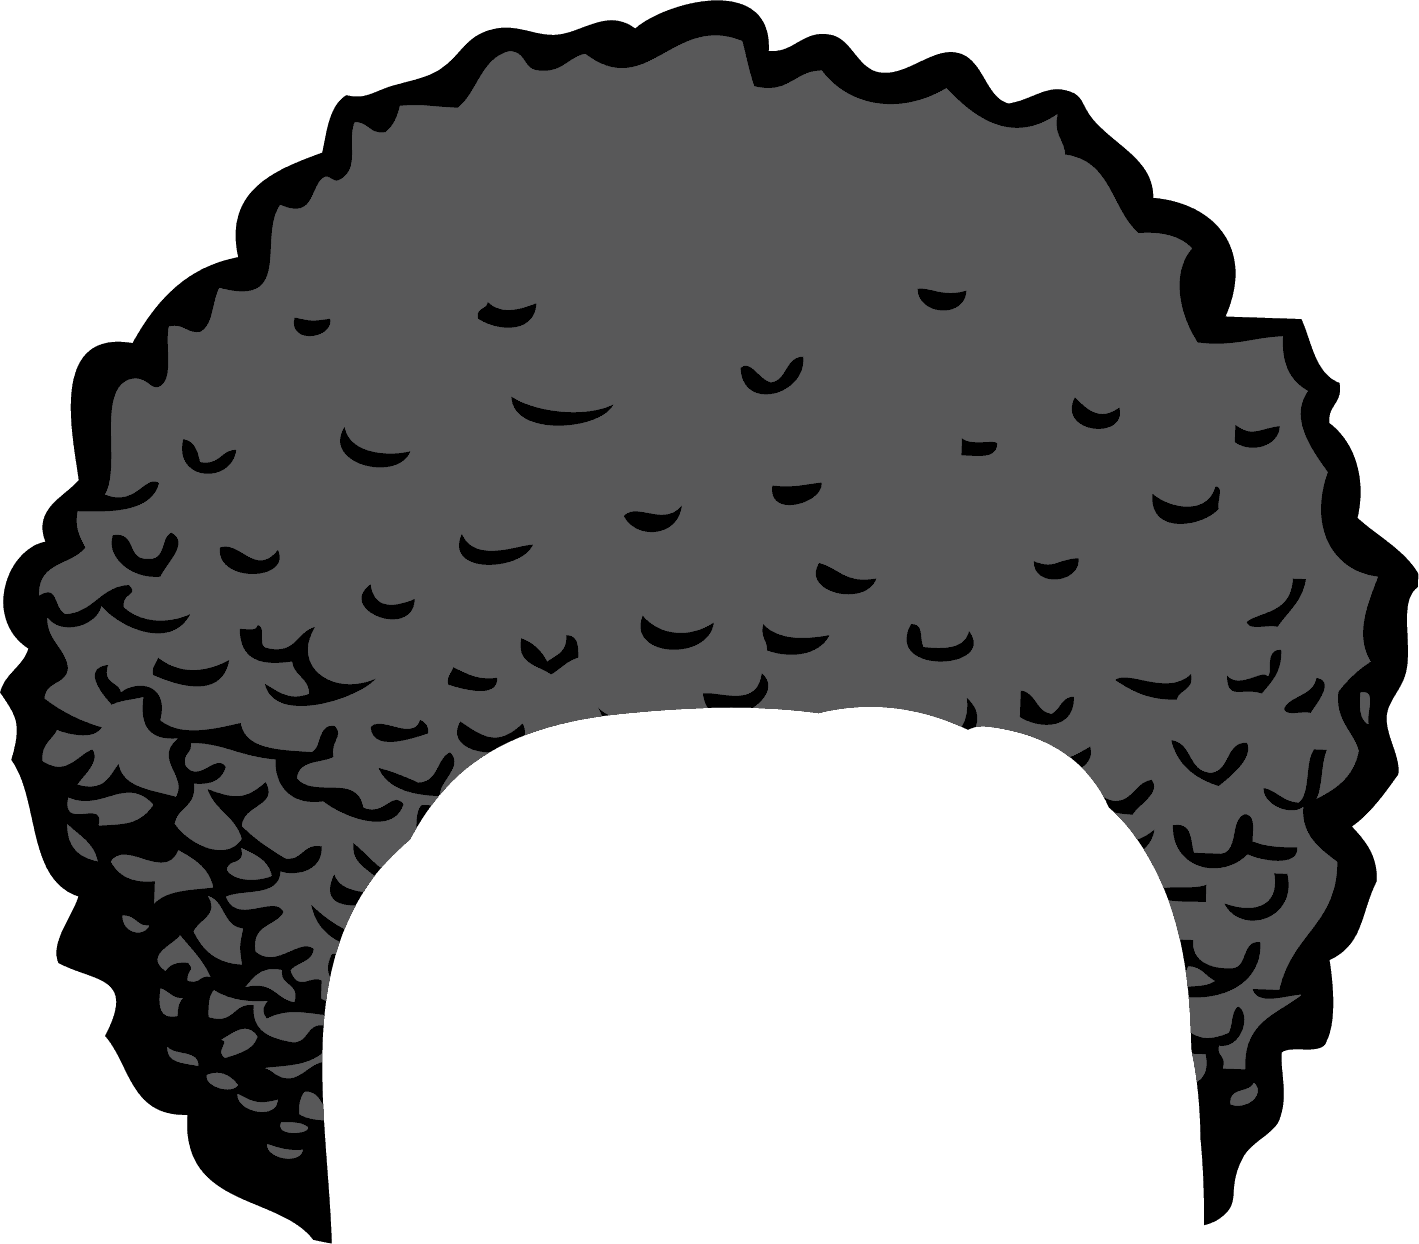 Afro wig clipart